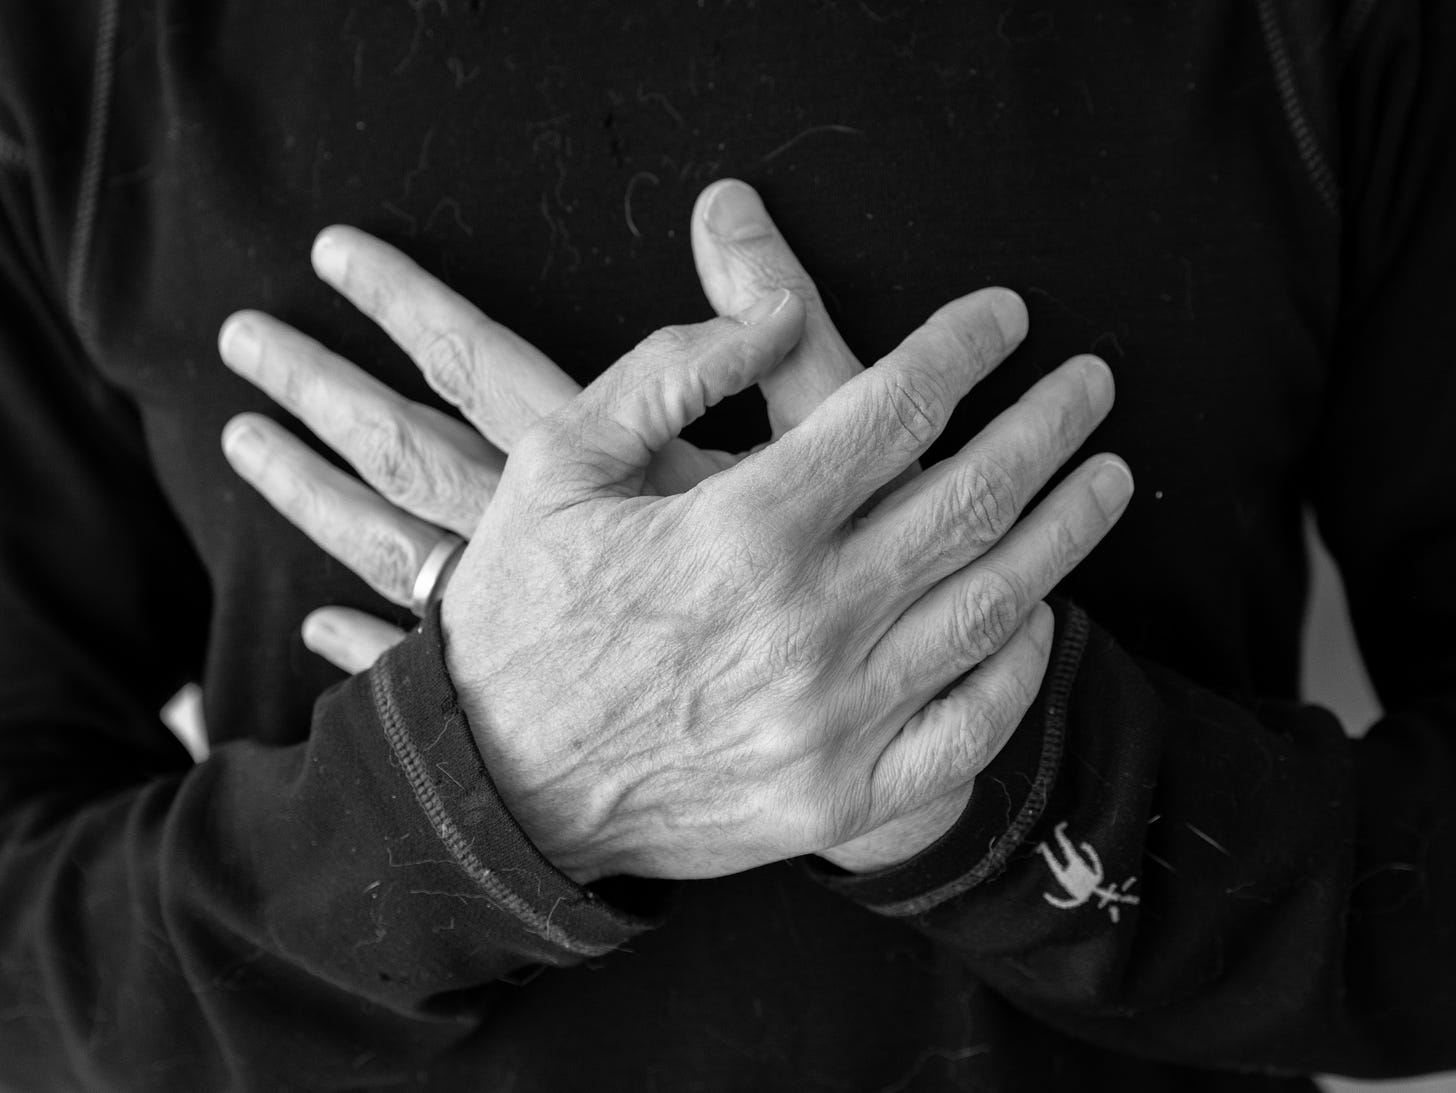 Randy with open palms crossed over his heart in black and white